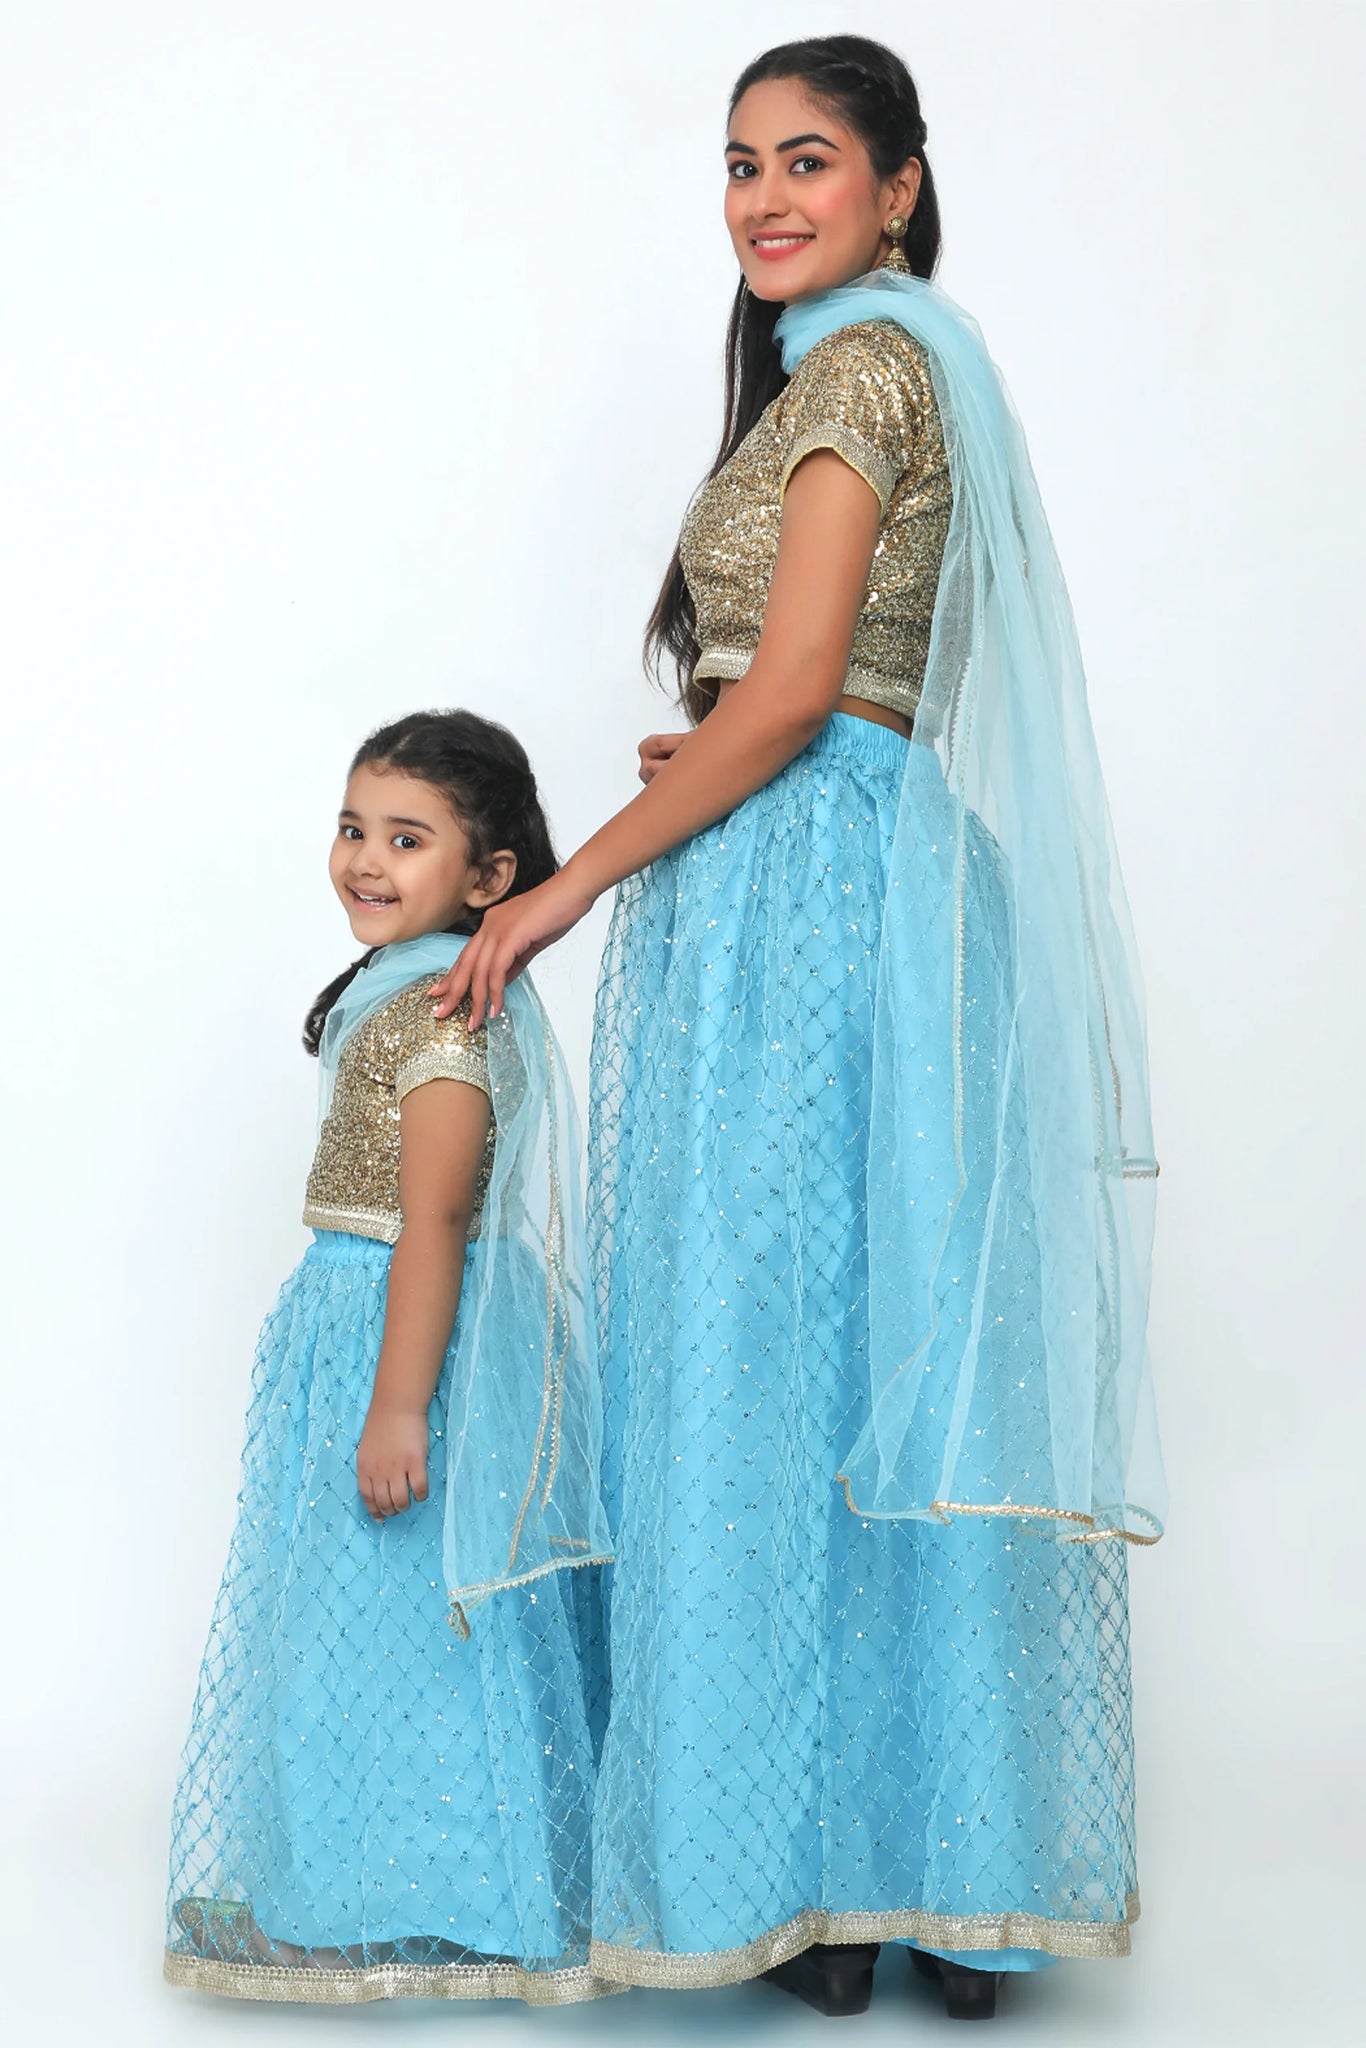 Buy Mother Daughter Dress Indian Lehenga Blouse for Women Mother Daughter  Matching Combo Set Party Wear Lengha for Kids,baby Girl & Mom Online in  India - Etsy